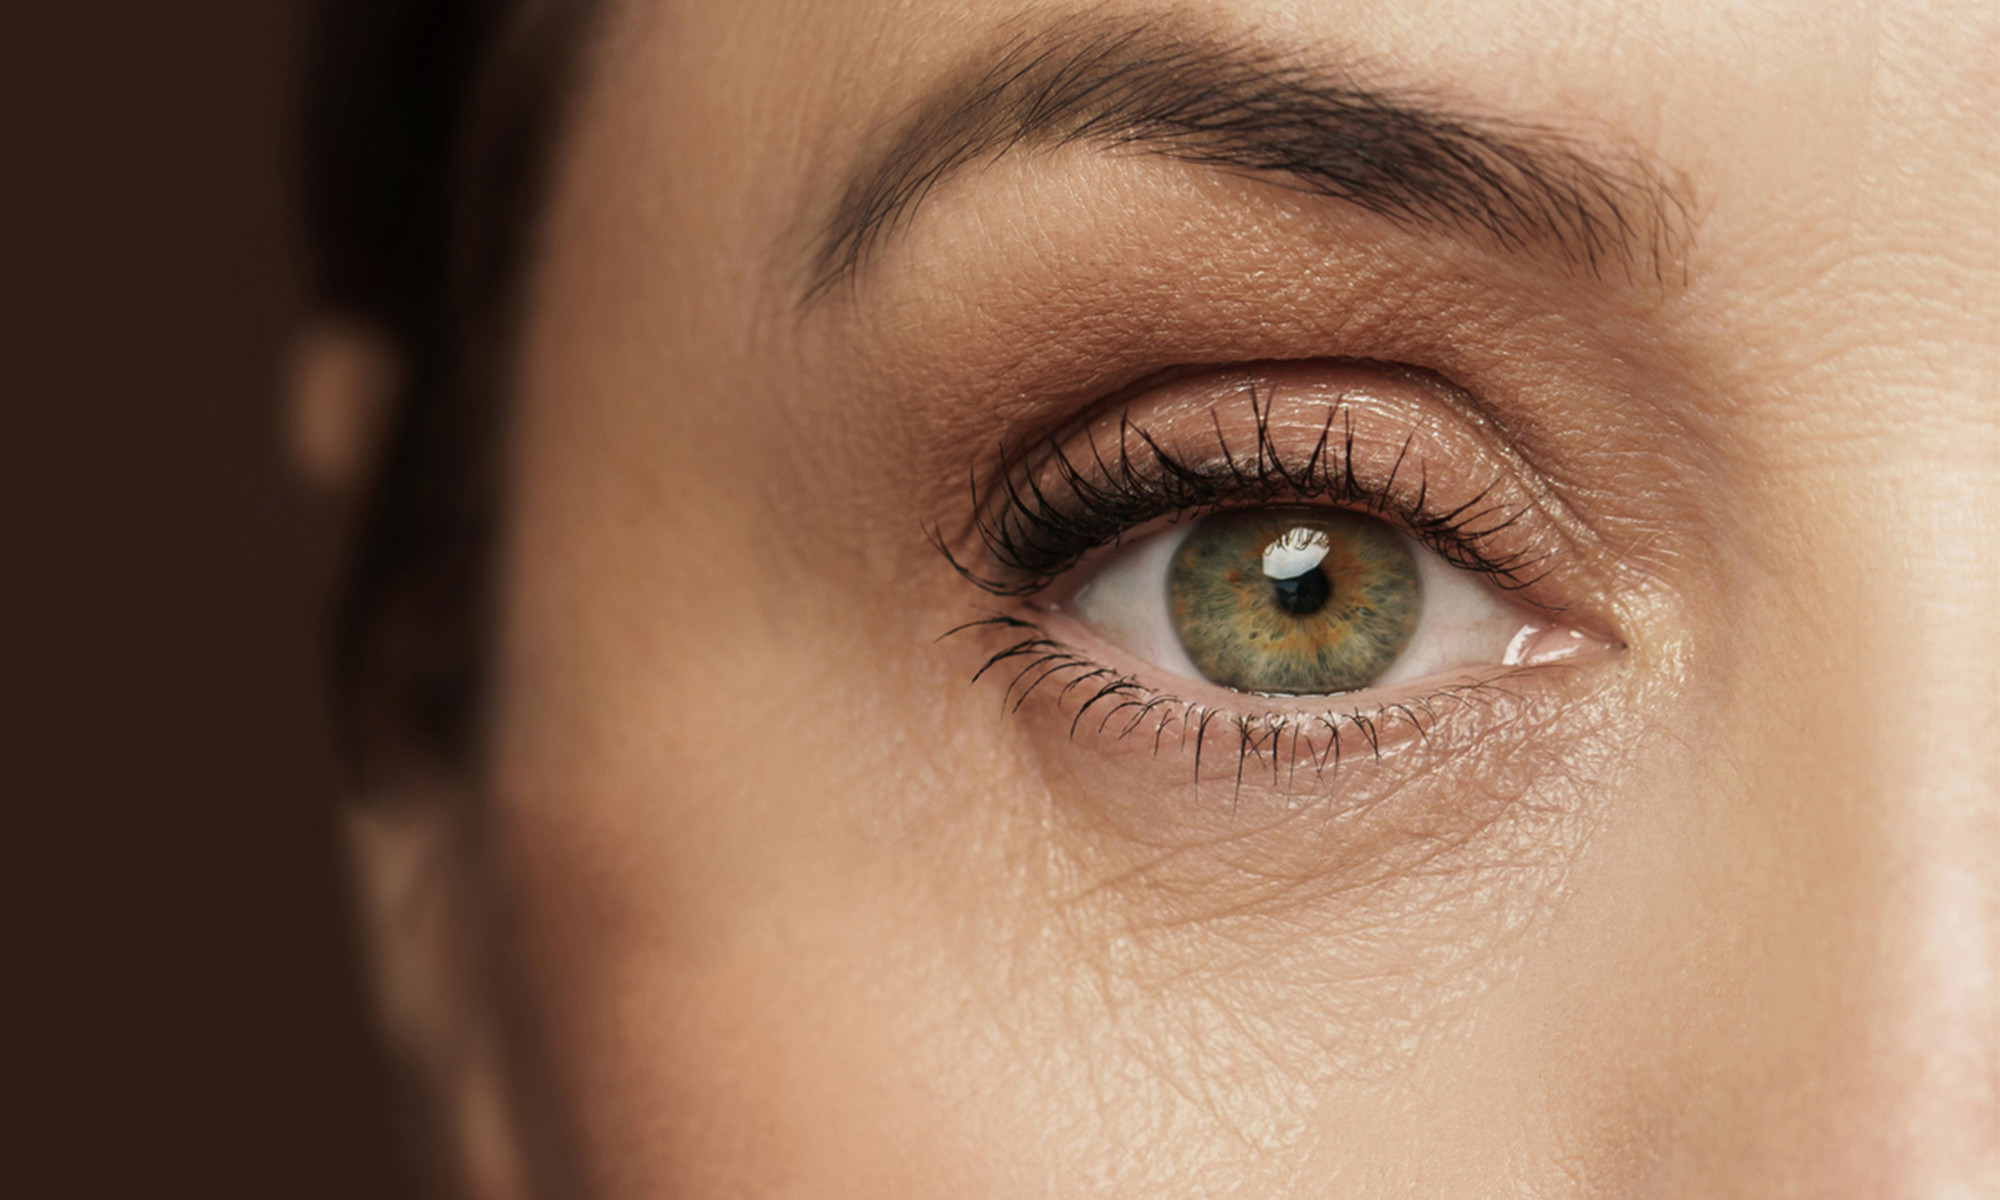 How to Remove Wrinkles under Eyes?